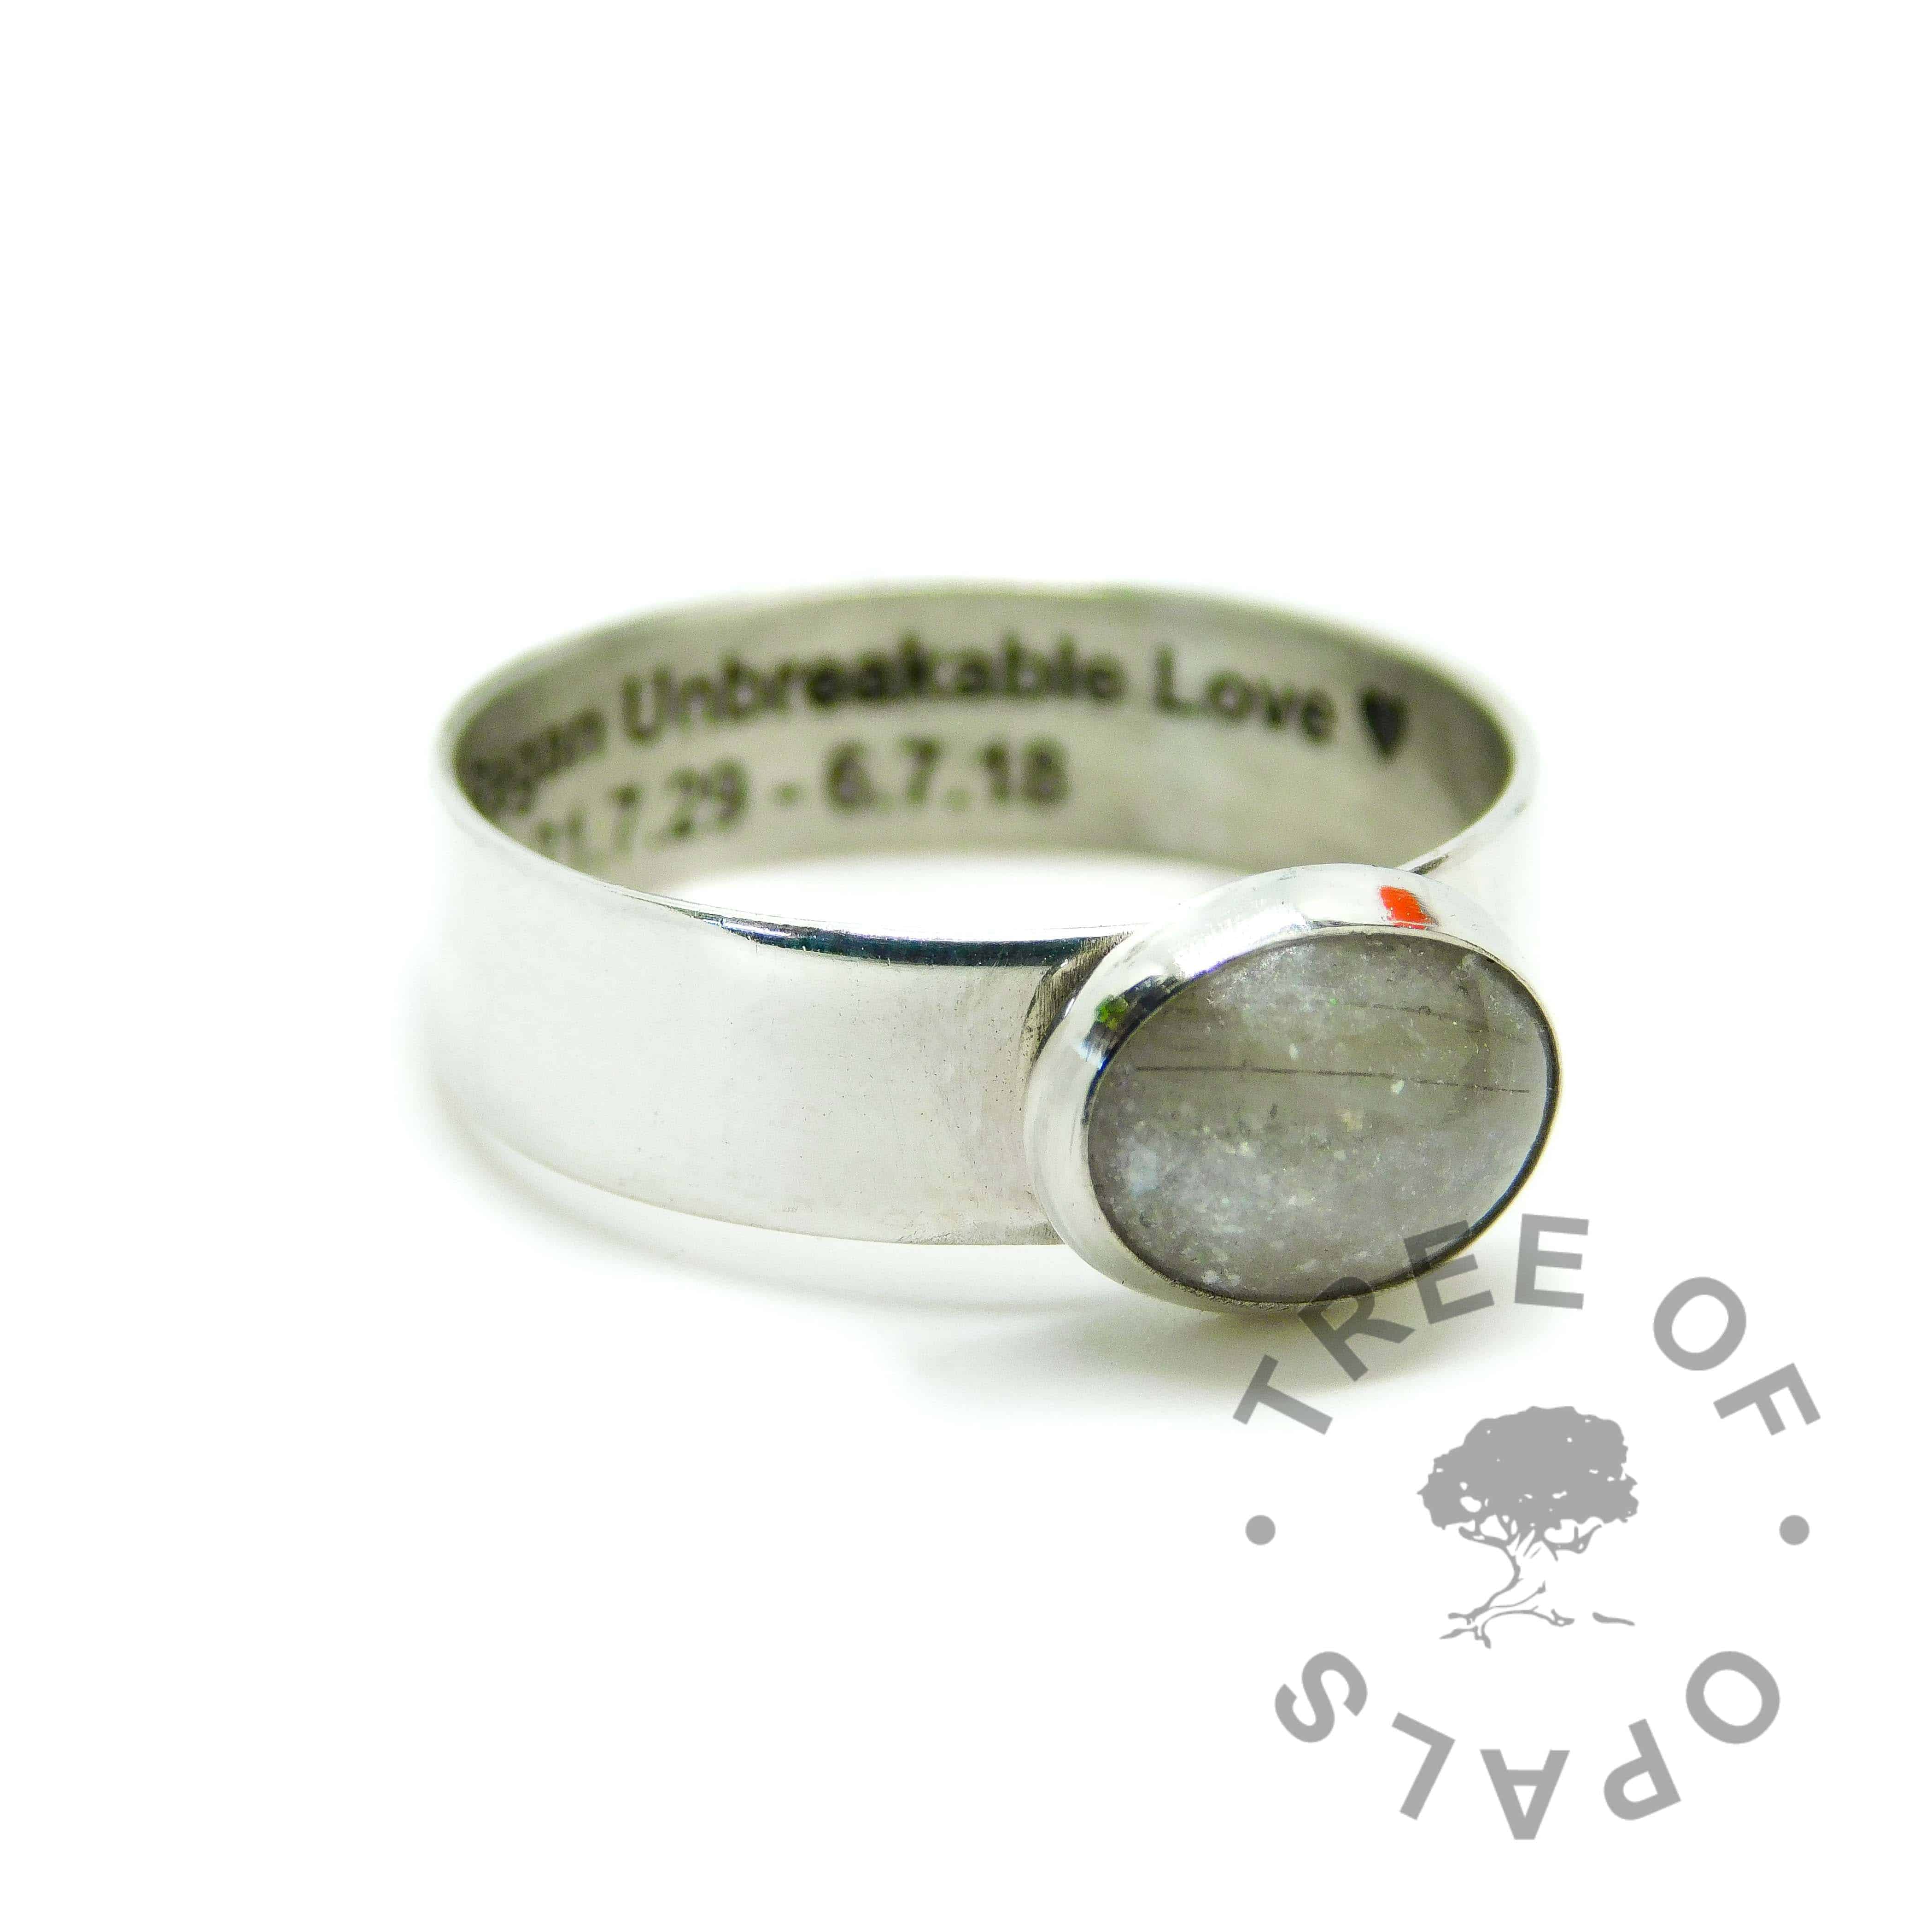 6mm shiny band hair ring engraved inside memorial in arial font, white hair and unicorn white resin sparkle mix